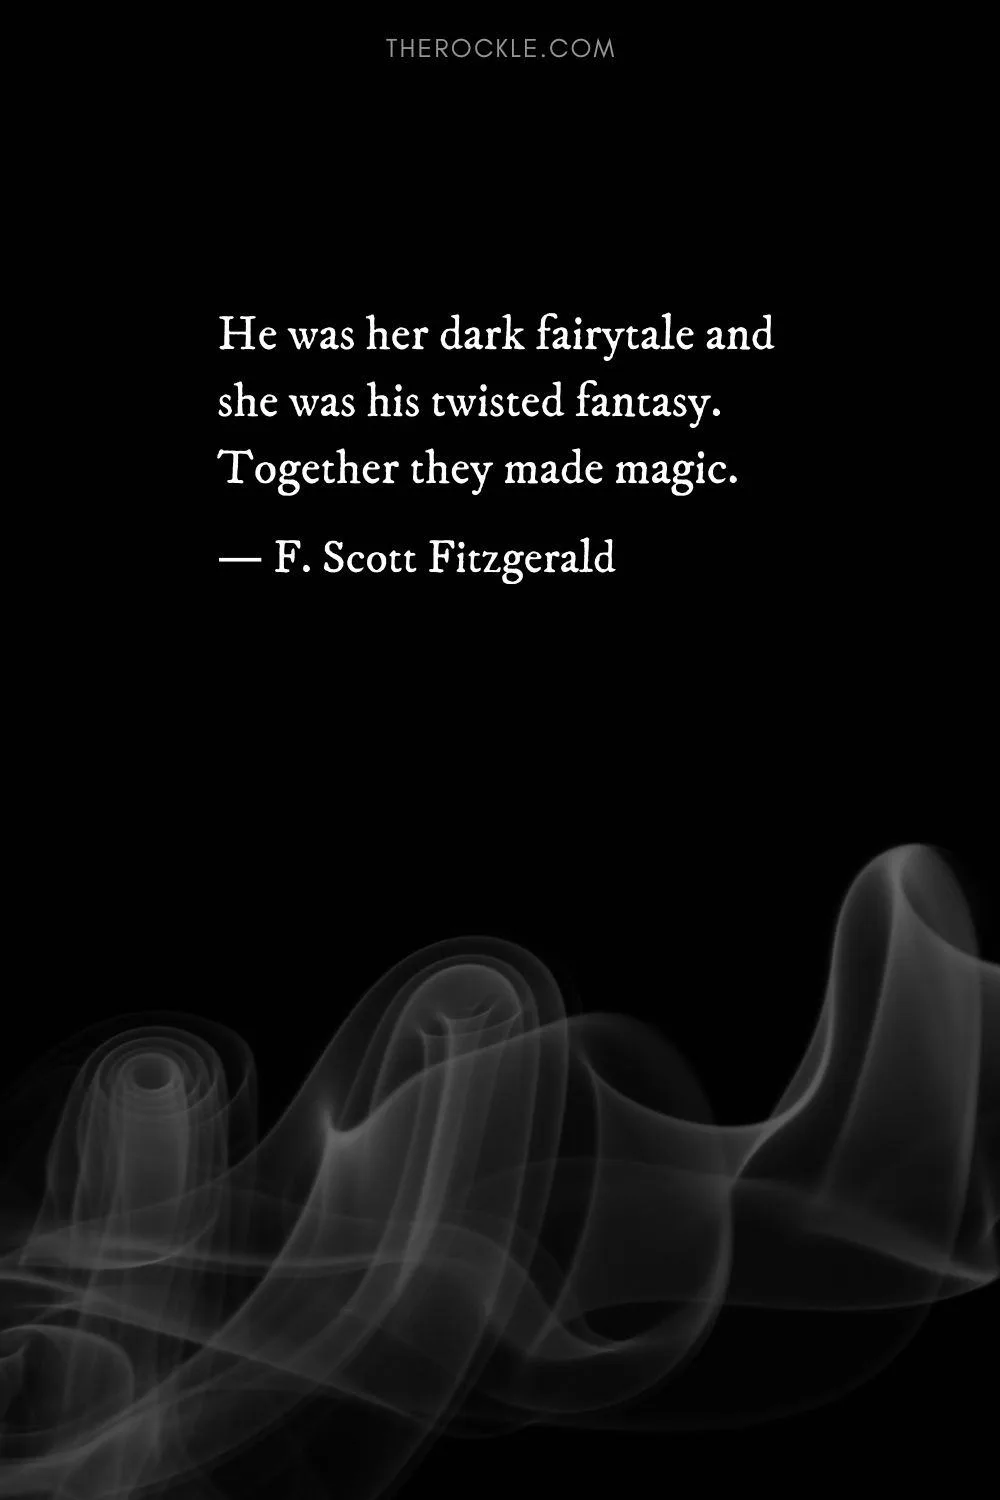 “He was her dark fairytale and she was his twisted fantasy. Together they made magic.” ― F. Scott Fitzgerald